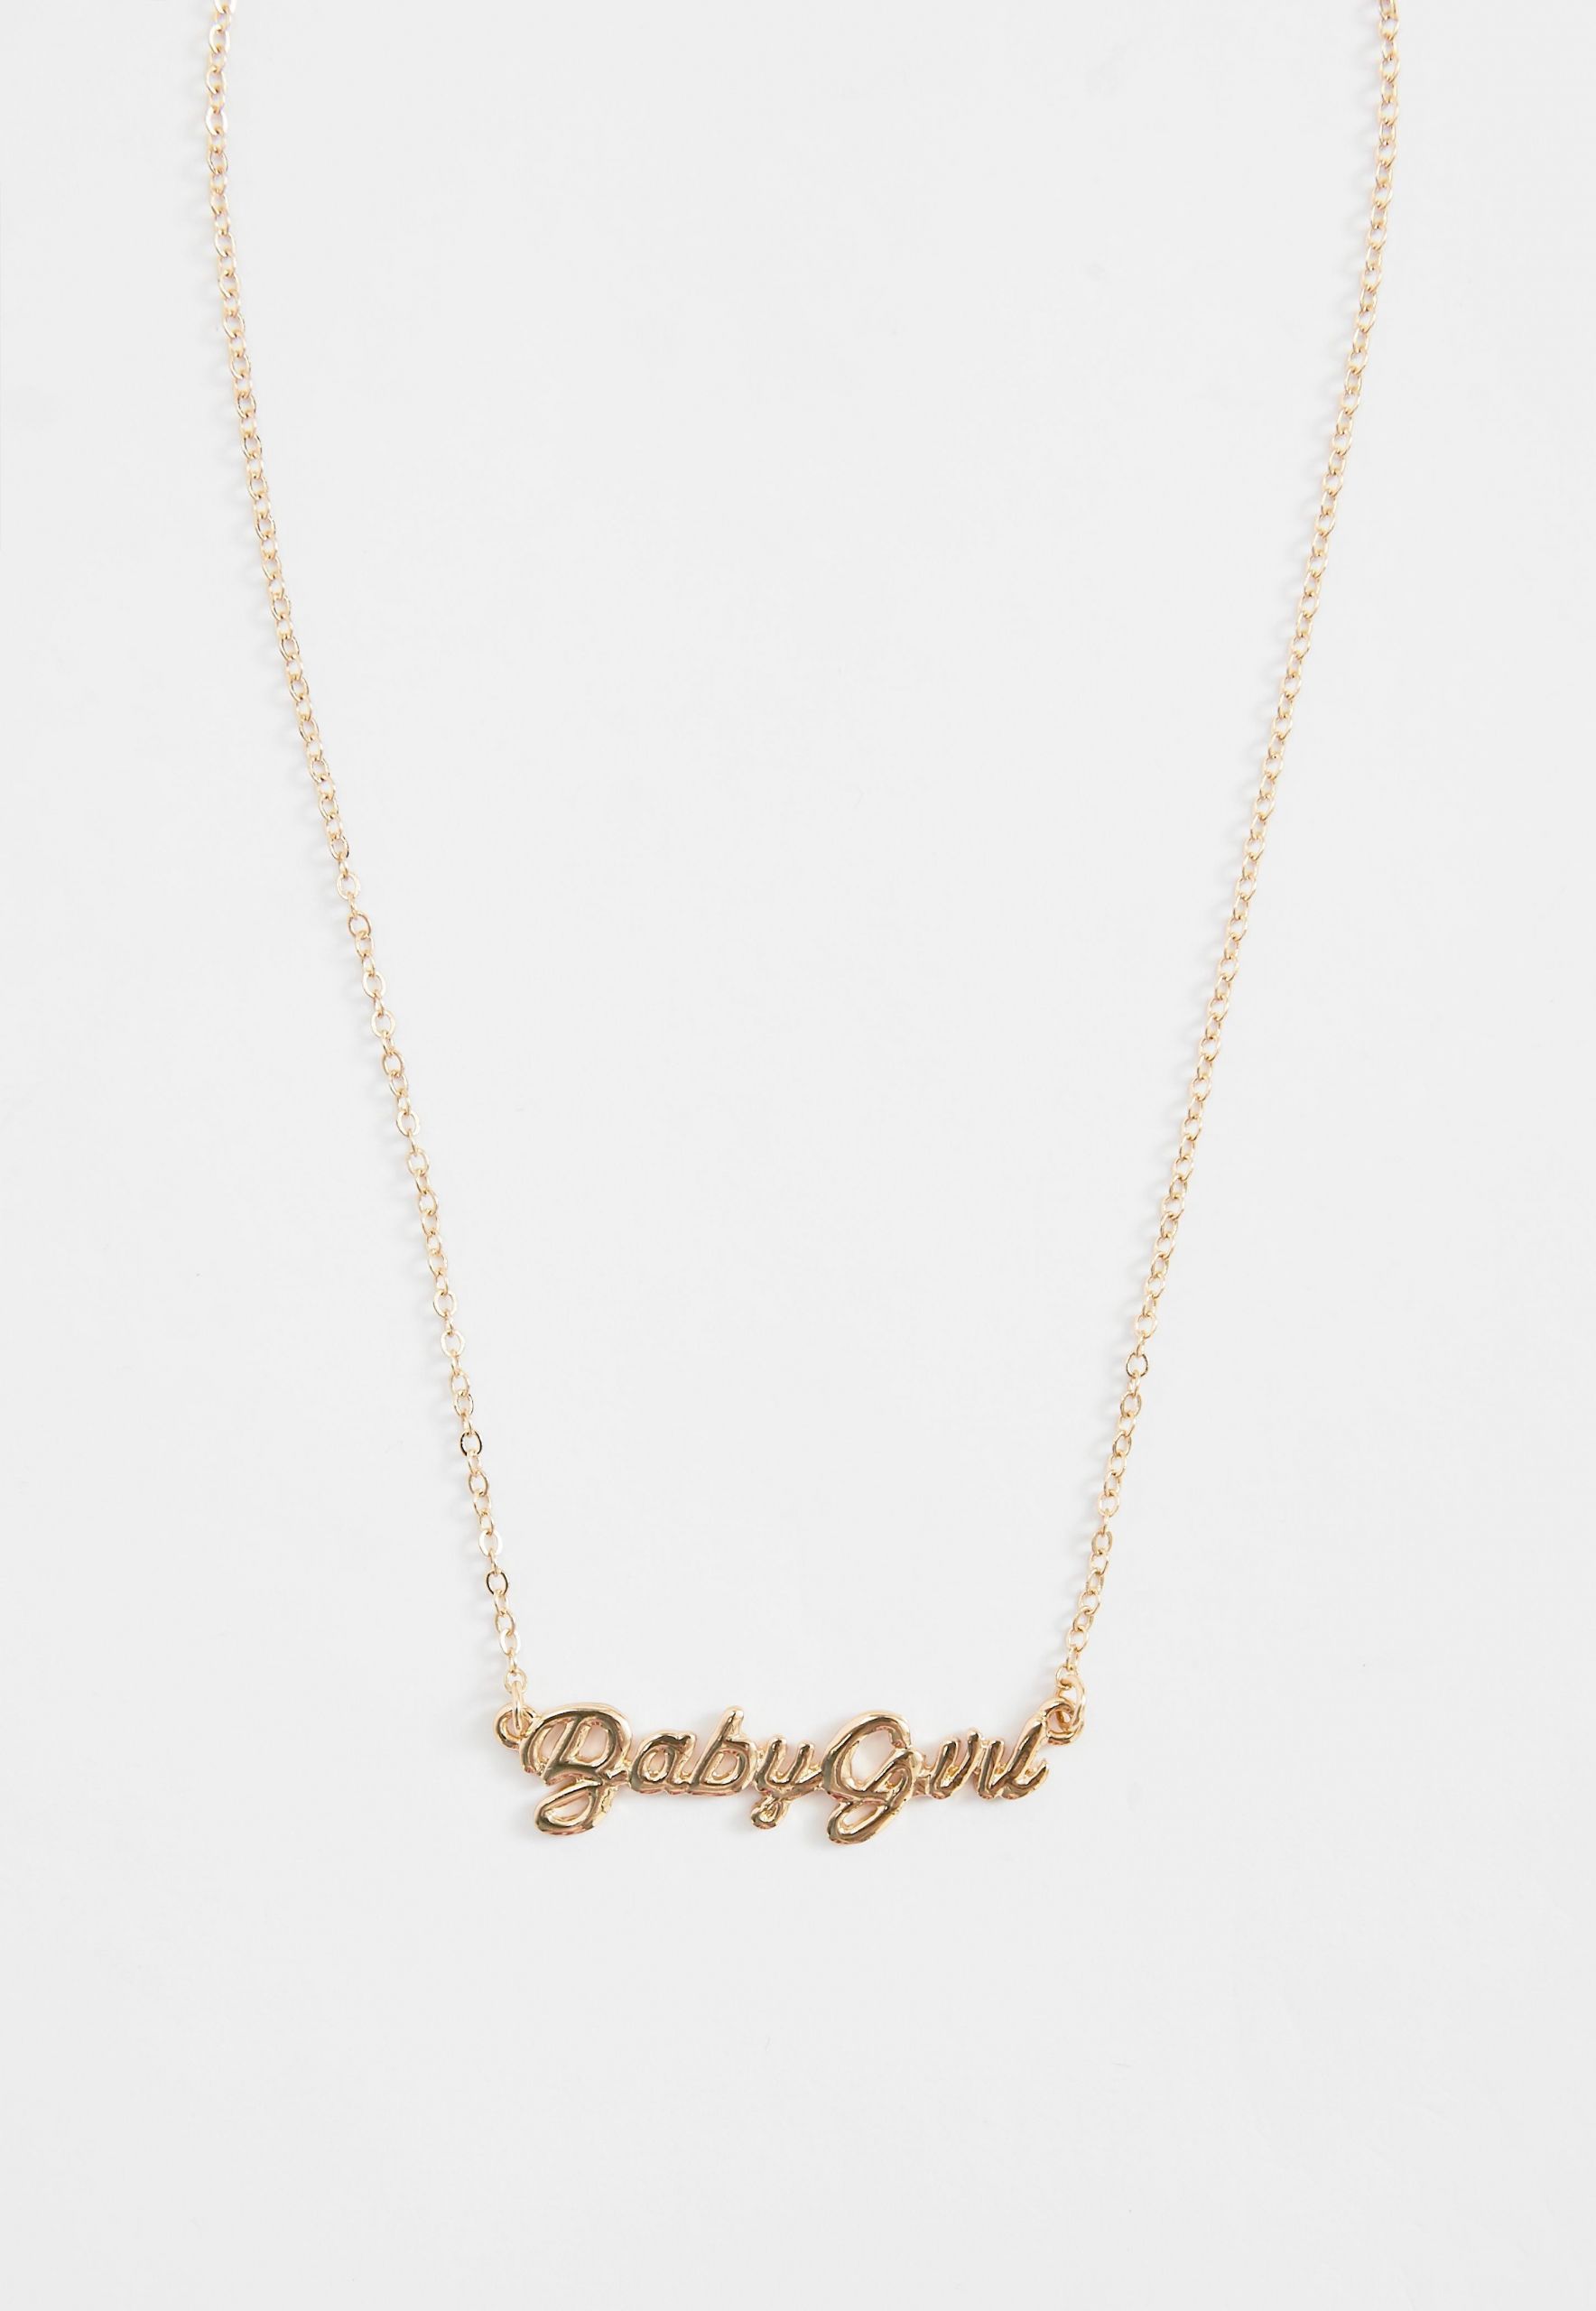 Baby Girl Gold Necklace
 Lyst Missguided Gold Baby Girl Necklace in Metallic